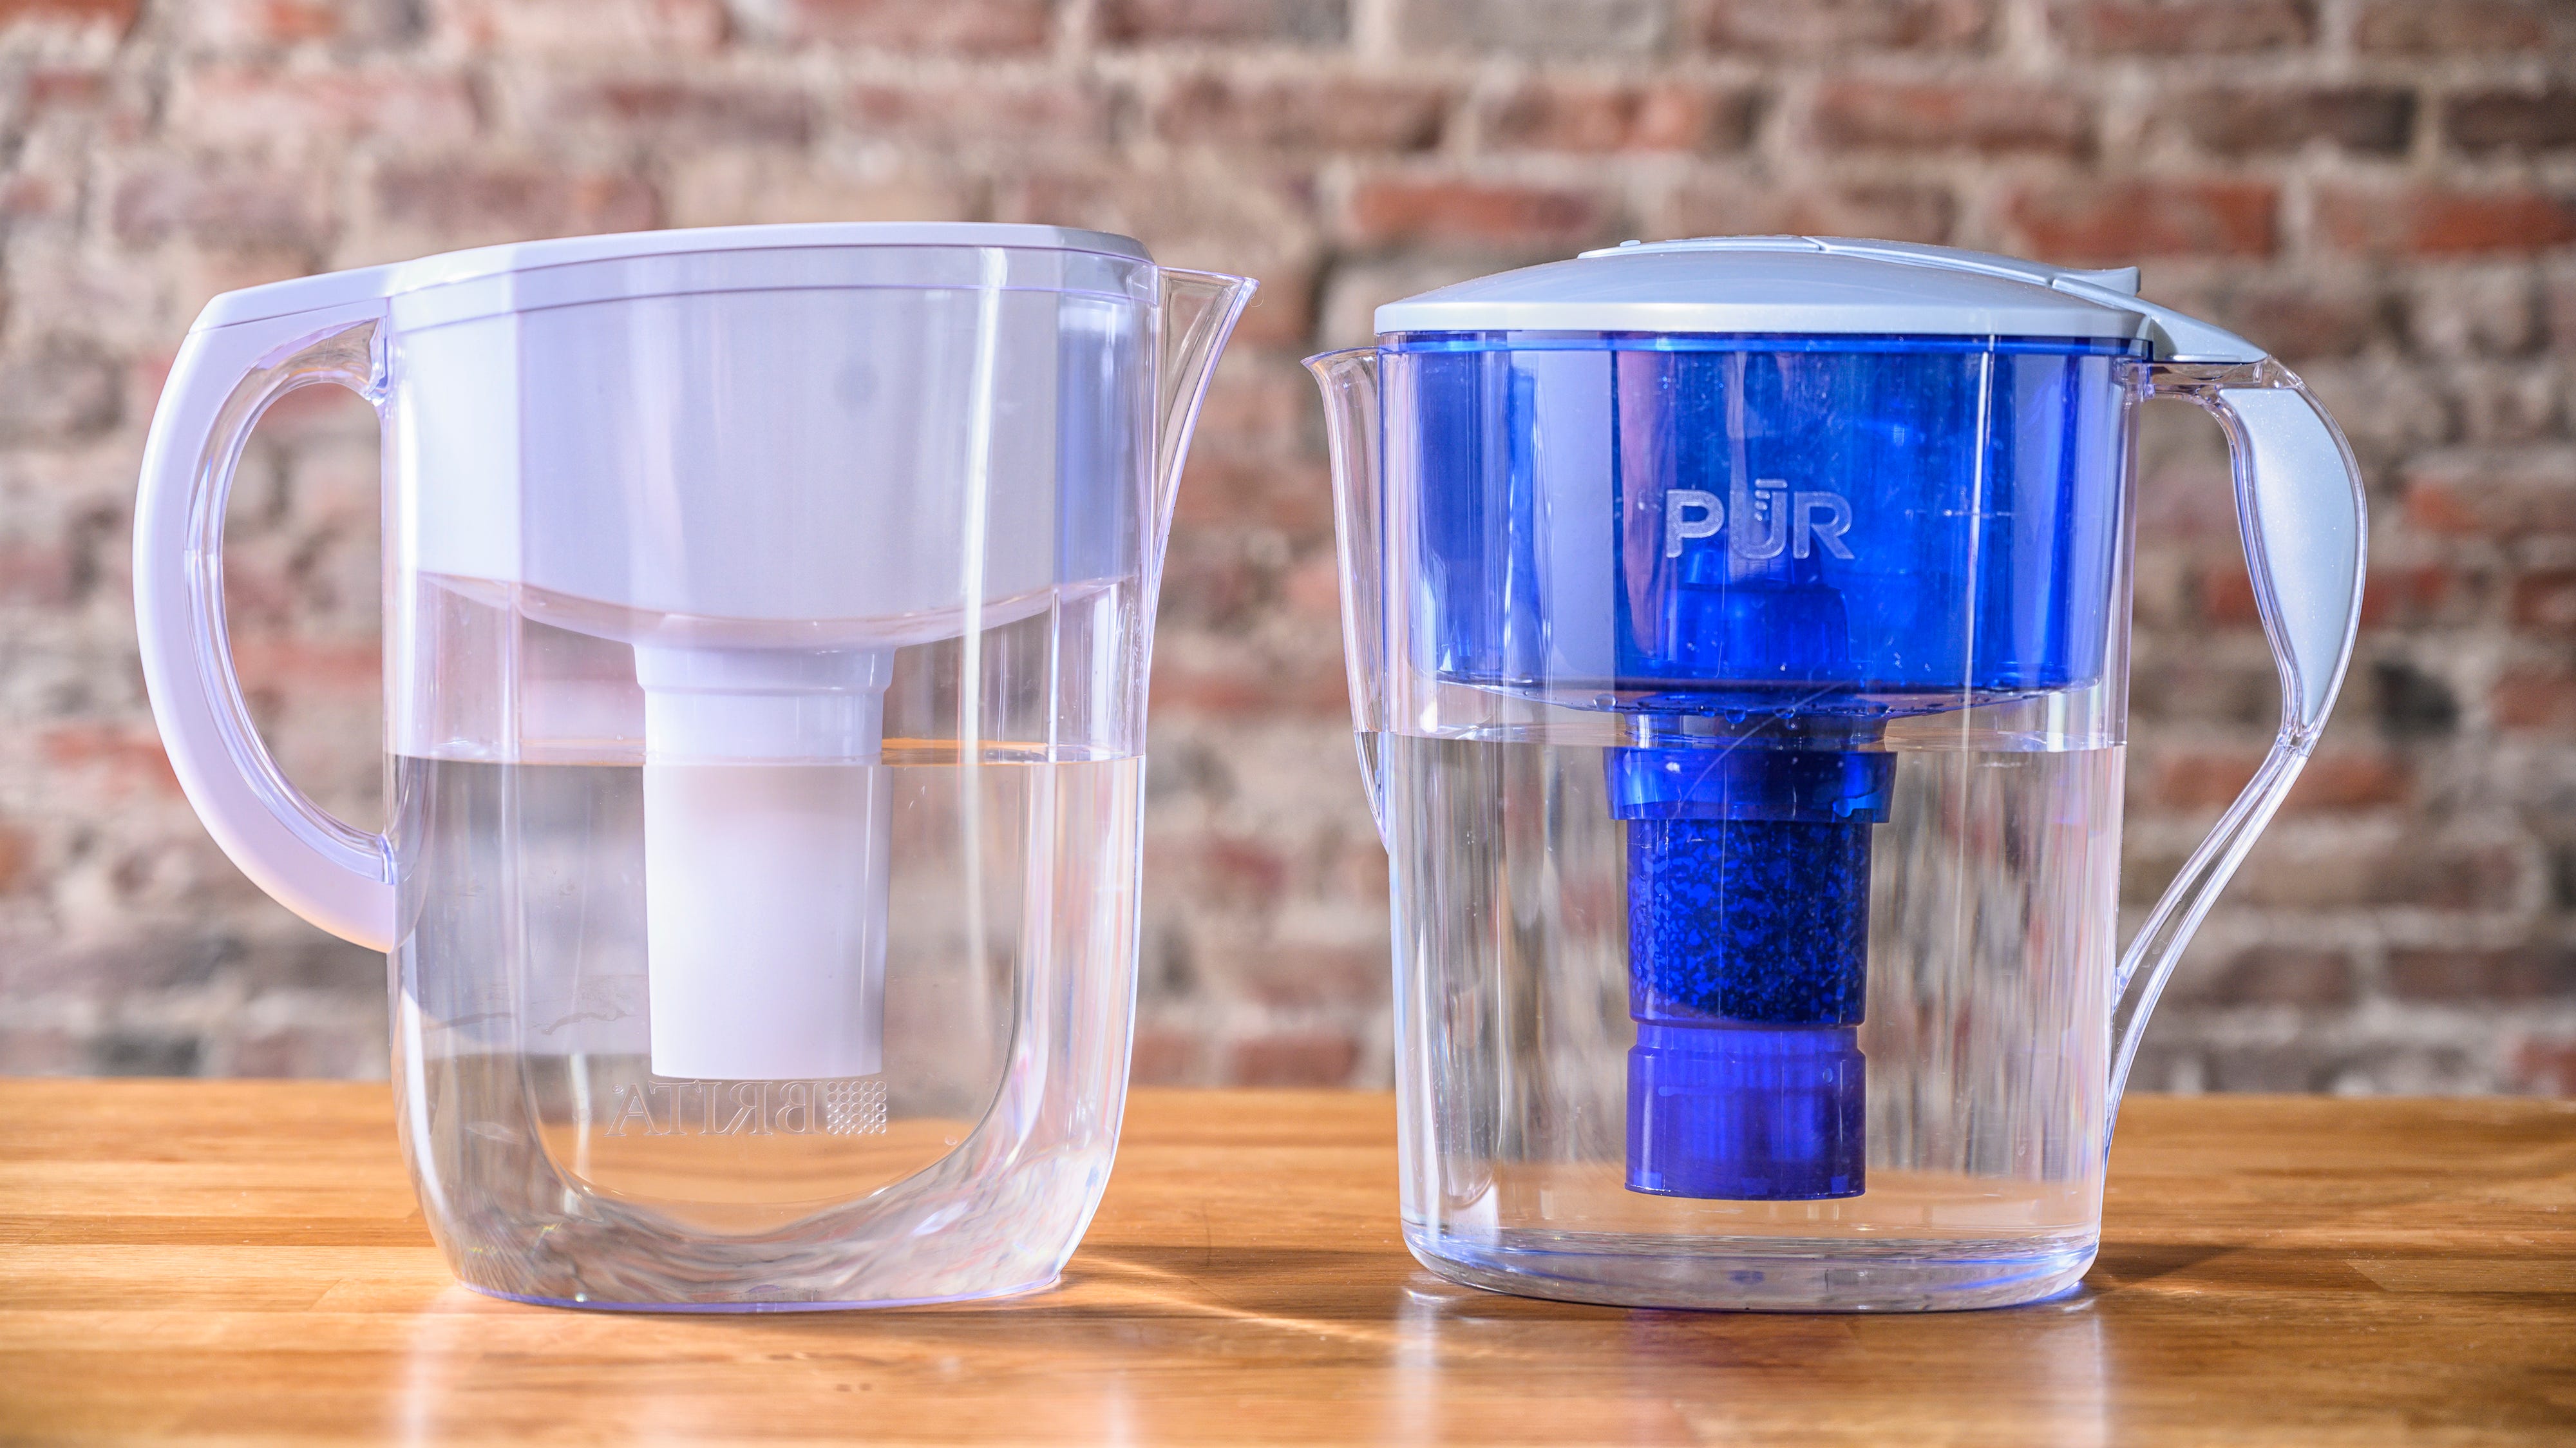 rommel Wind nog een keer Where to buy water filter pitchers: Brita, Pur, and more